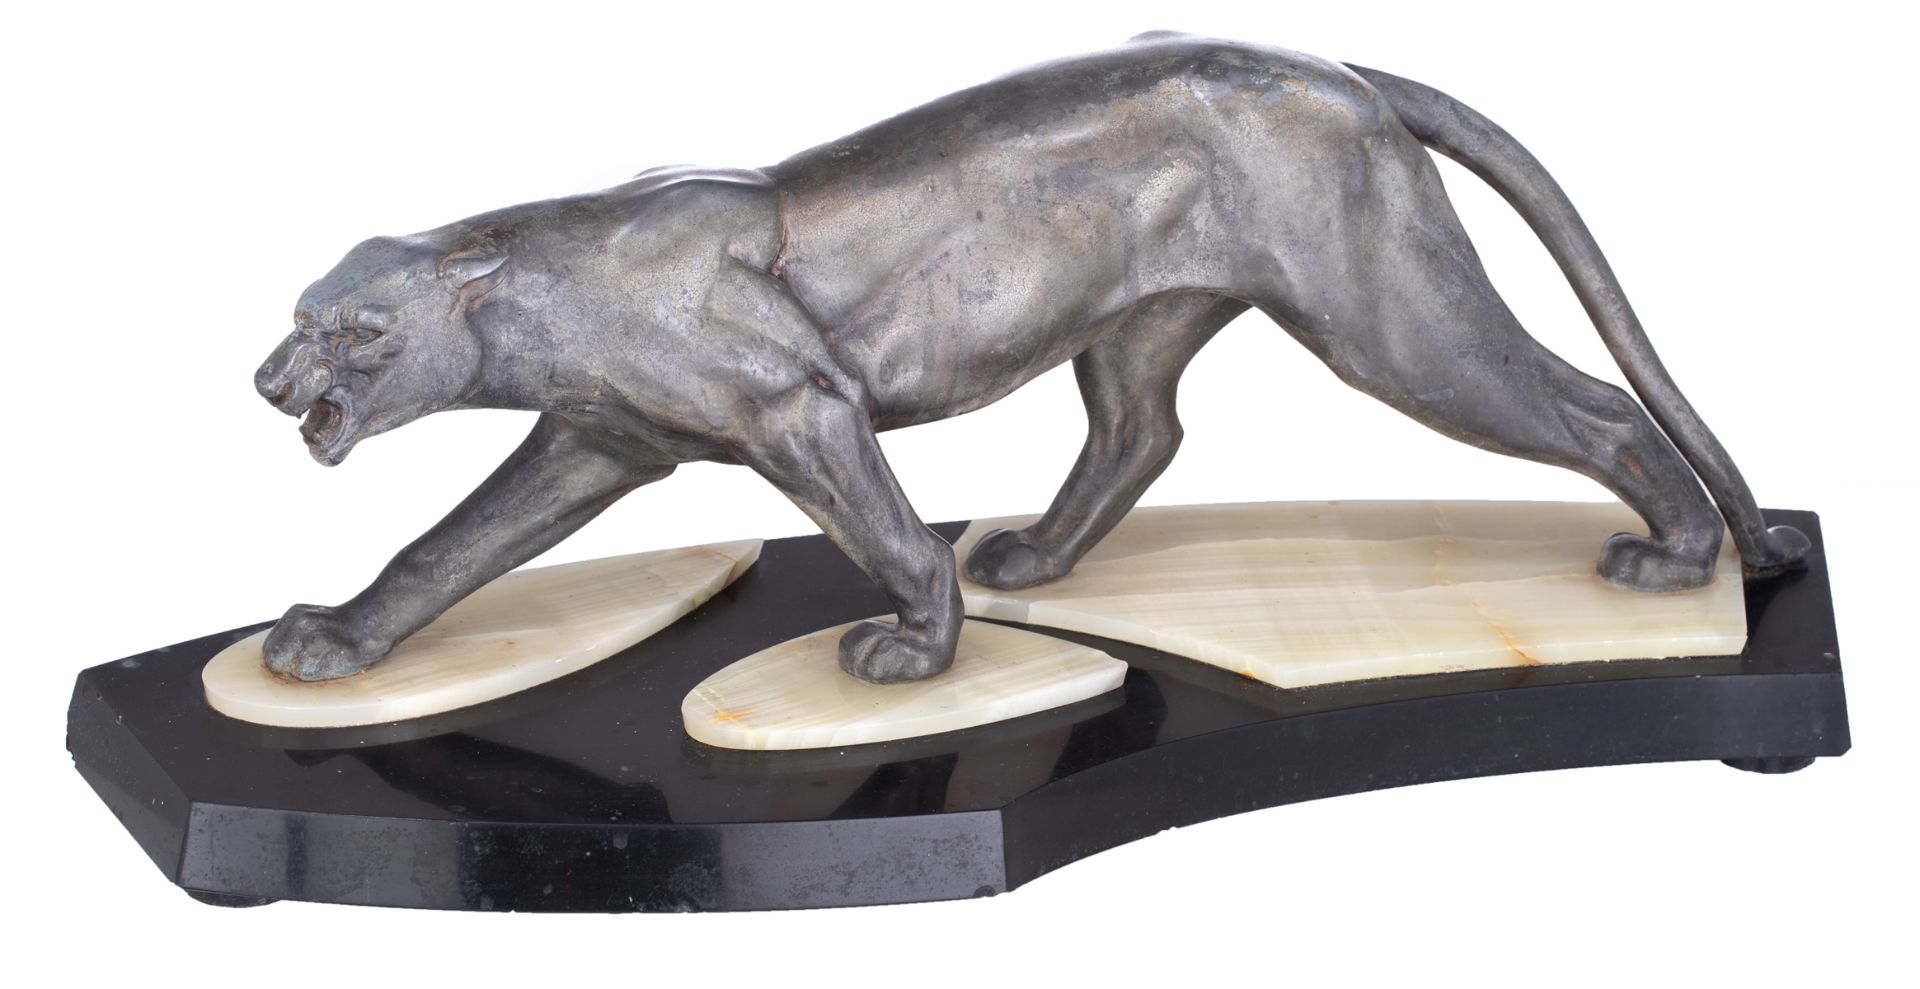 An Art Deco sculpture of a roaring panther, zamac on a noir Belge and green onyx base, H 18,5 - 24 -